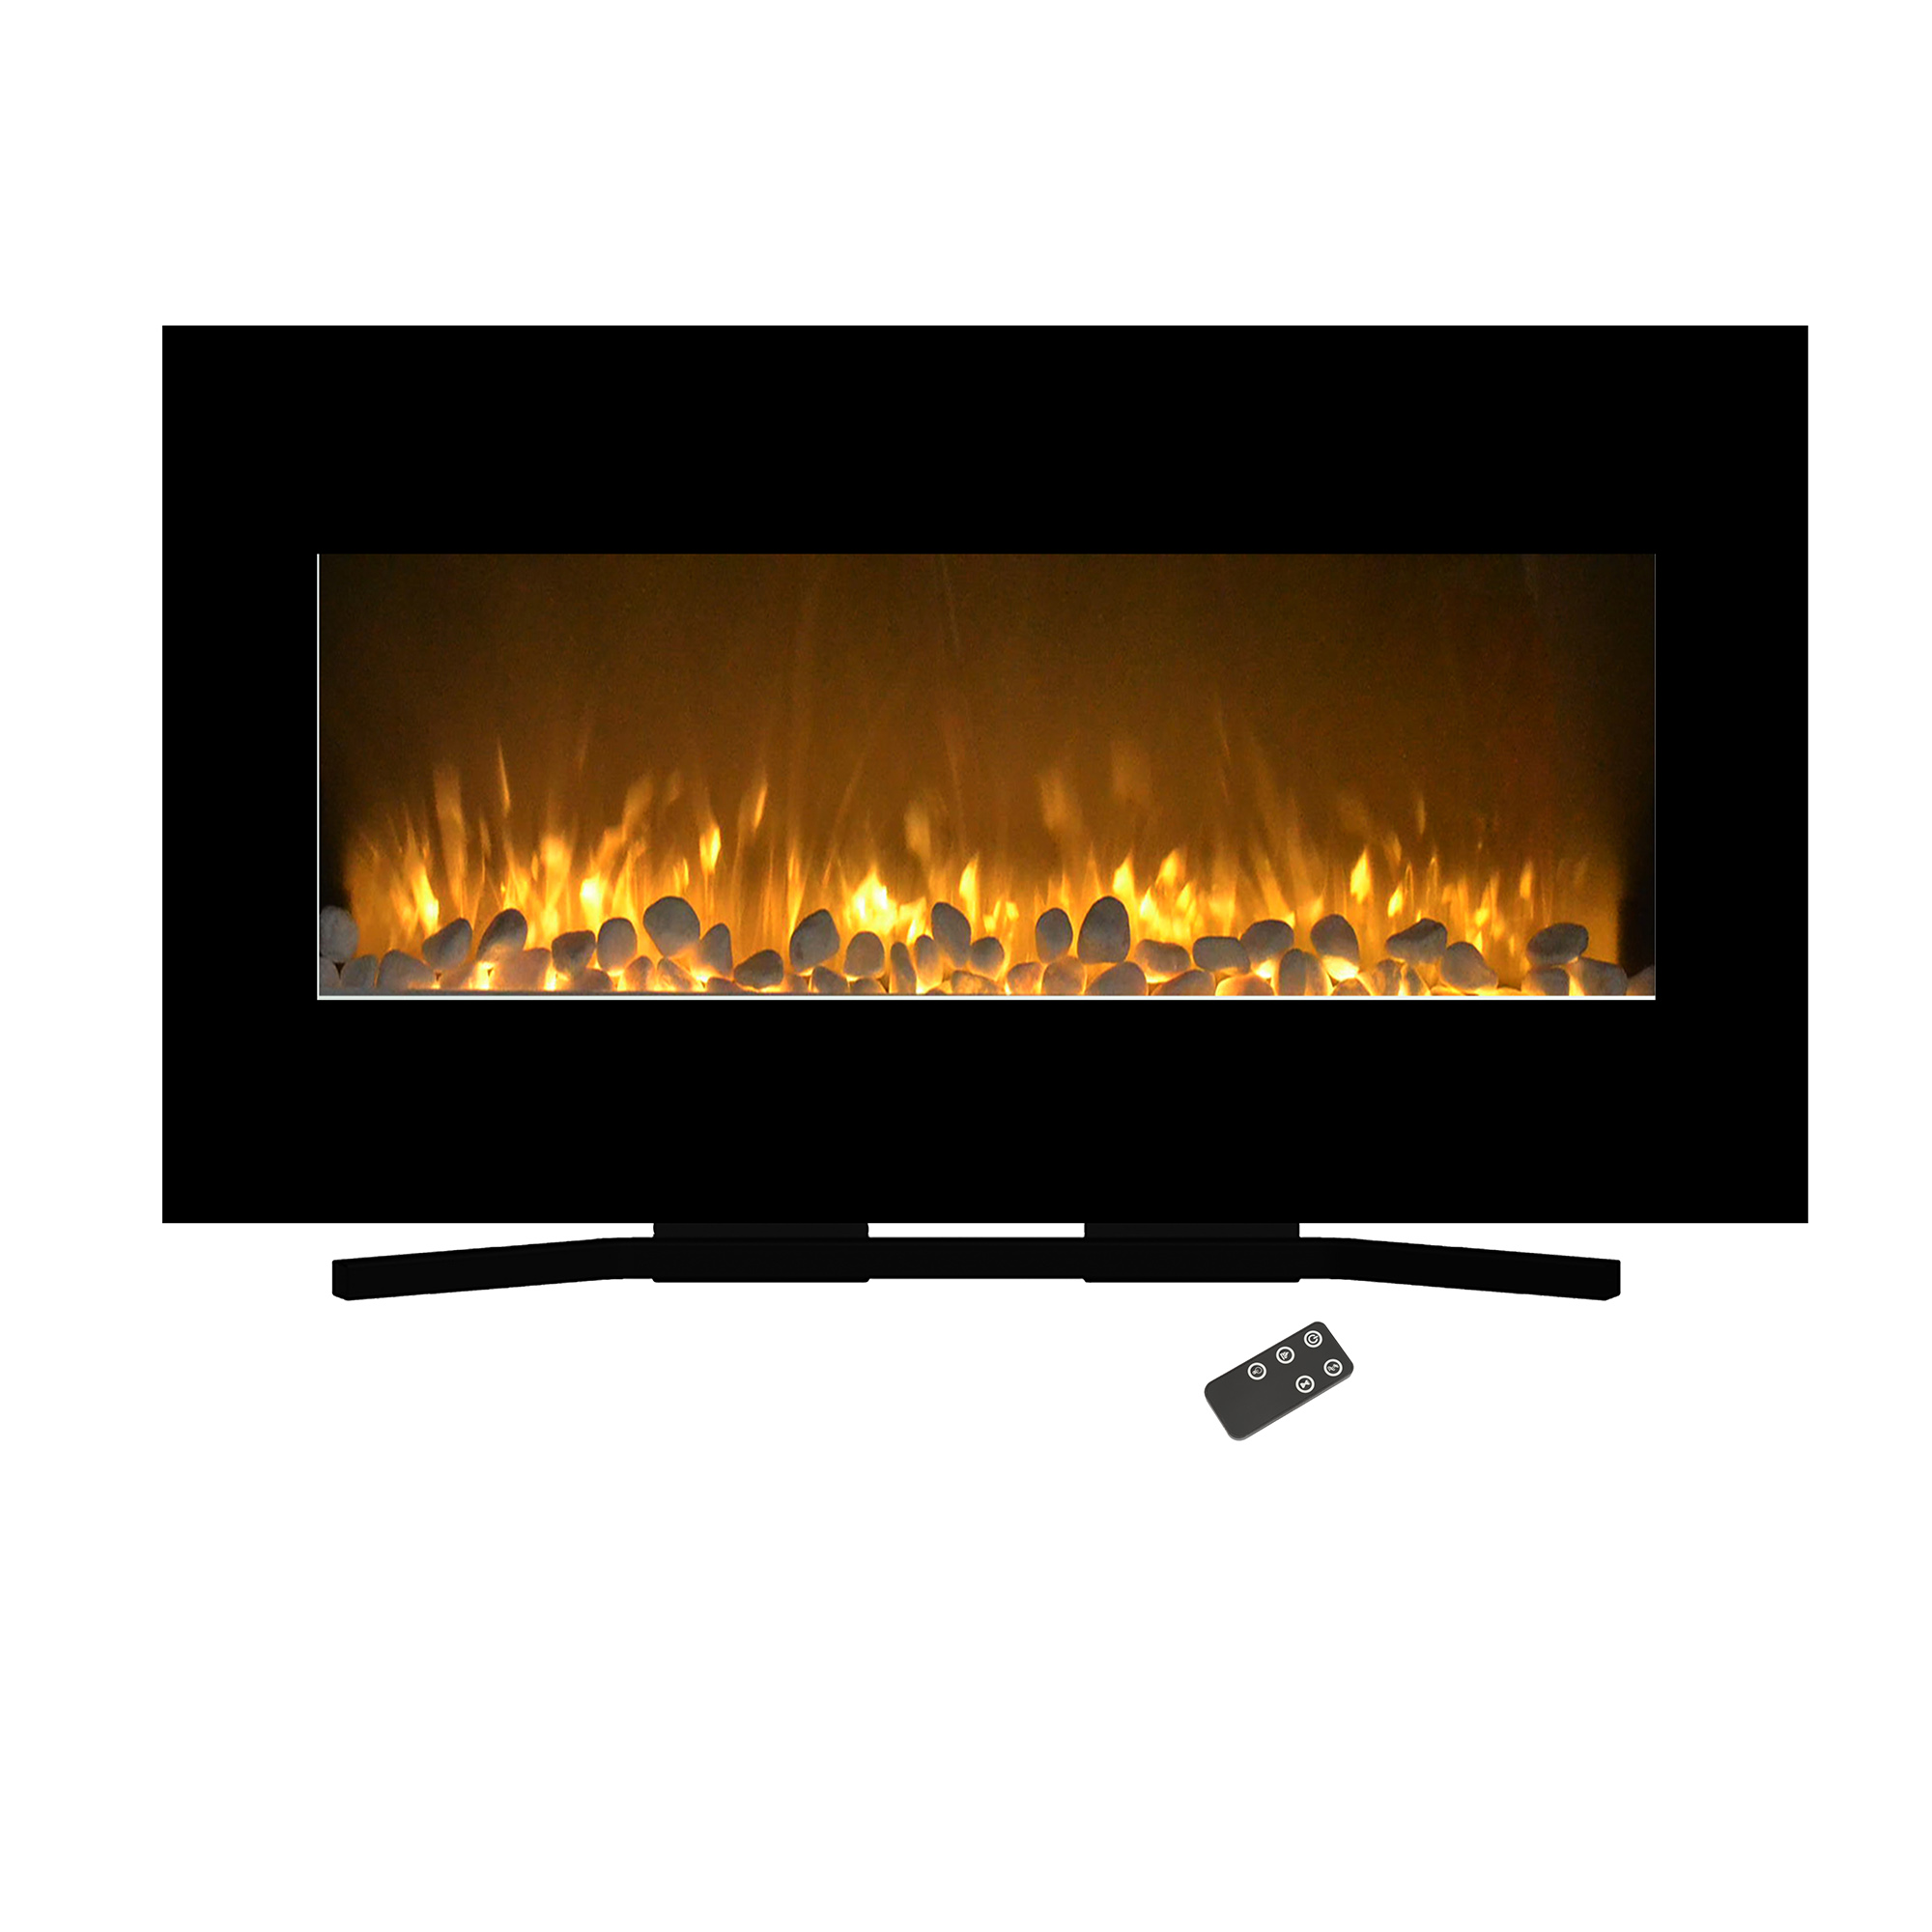 Northwest 36-inch Wall-Mount Modern Electric Fireplace with Remote, Black - image 5 of 5